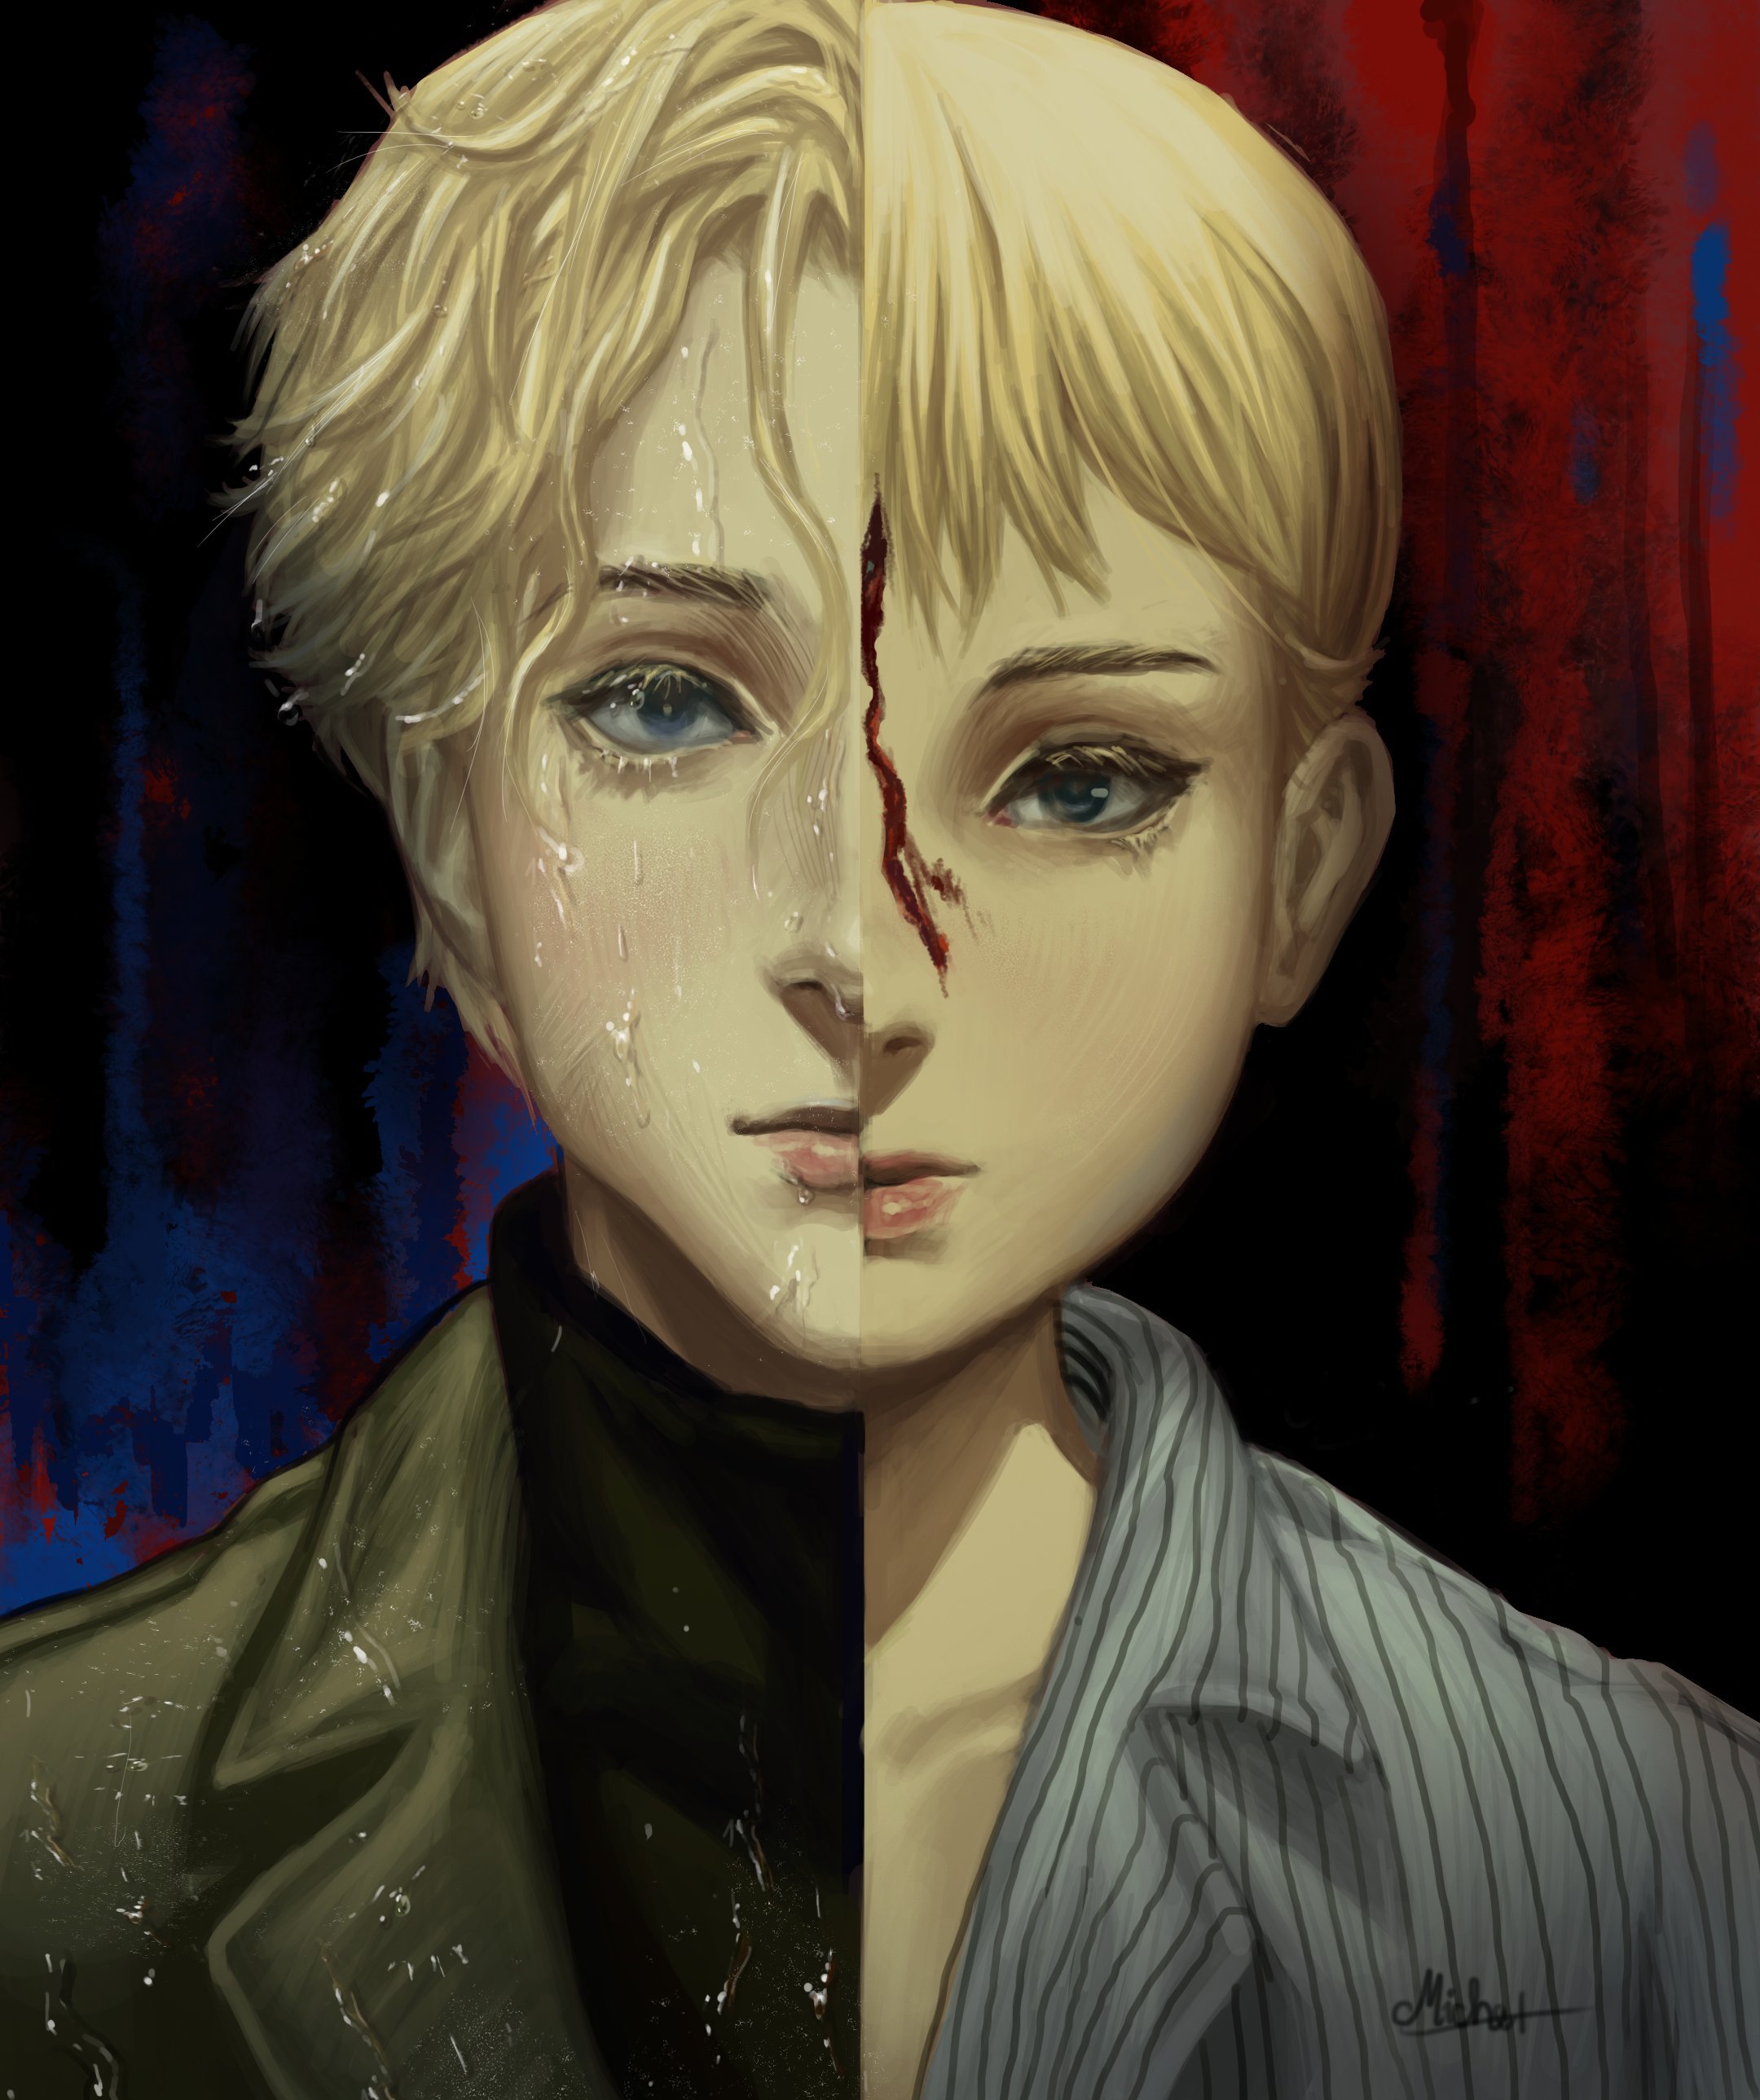 MicheTesoro with a quick painting for Johan Liebert from Monster. .. . #Johan_liebert #Johan #Johanliebert #painting #colorsketch